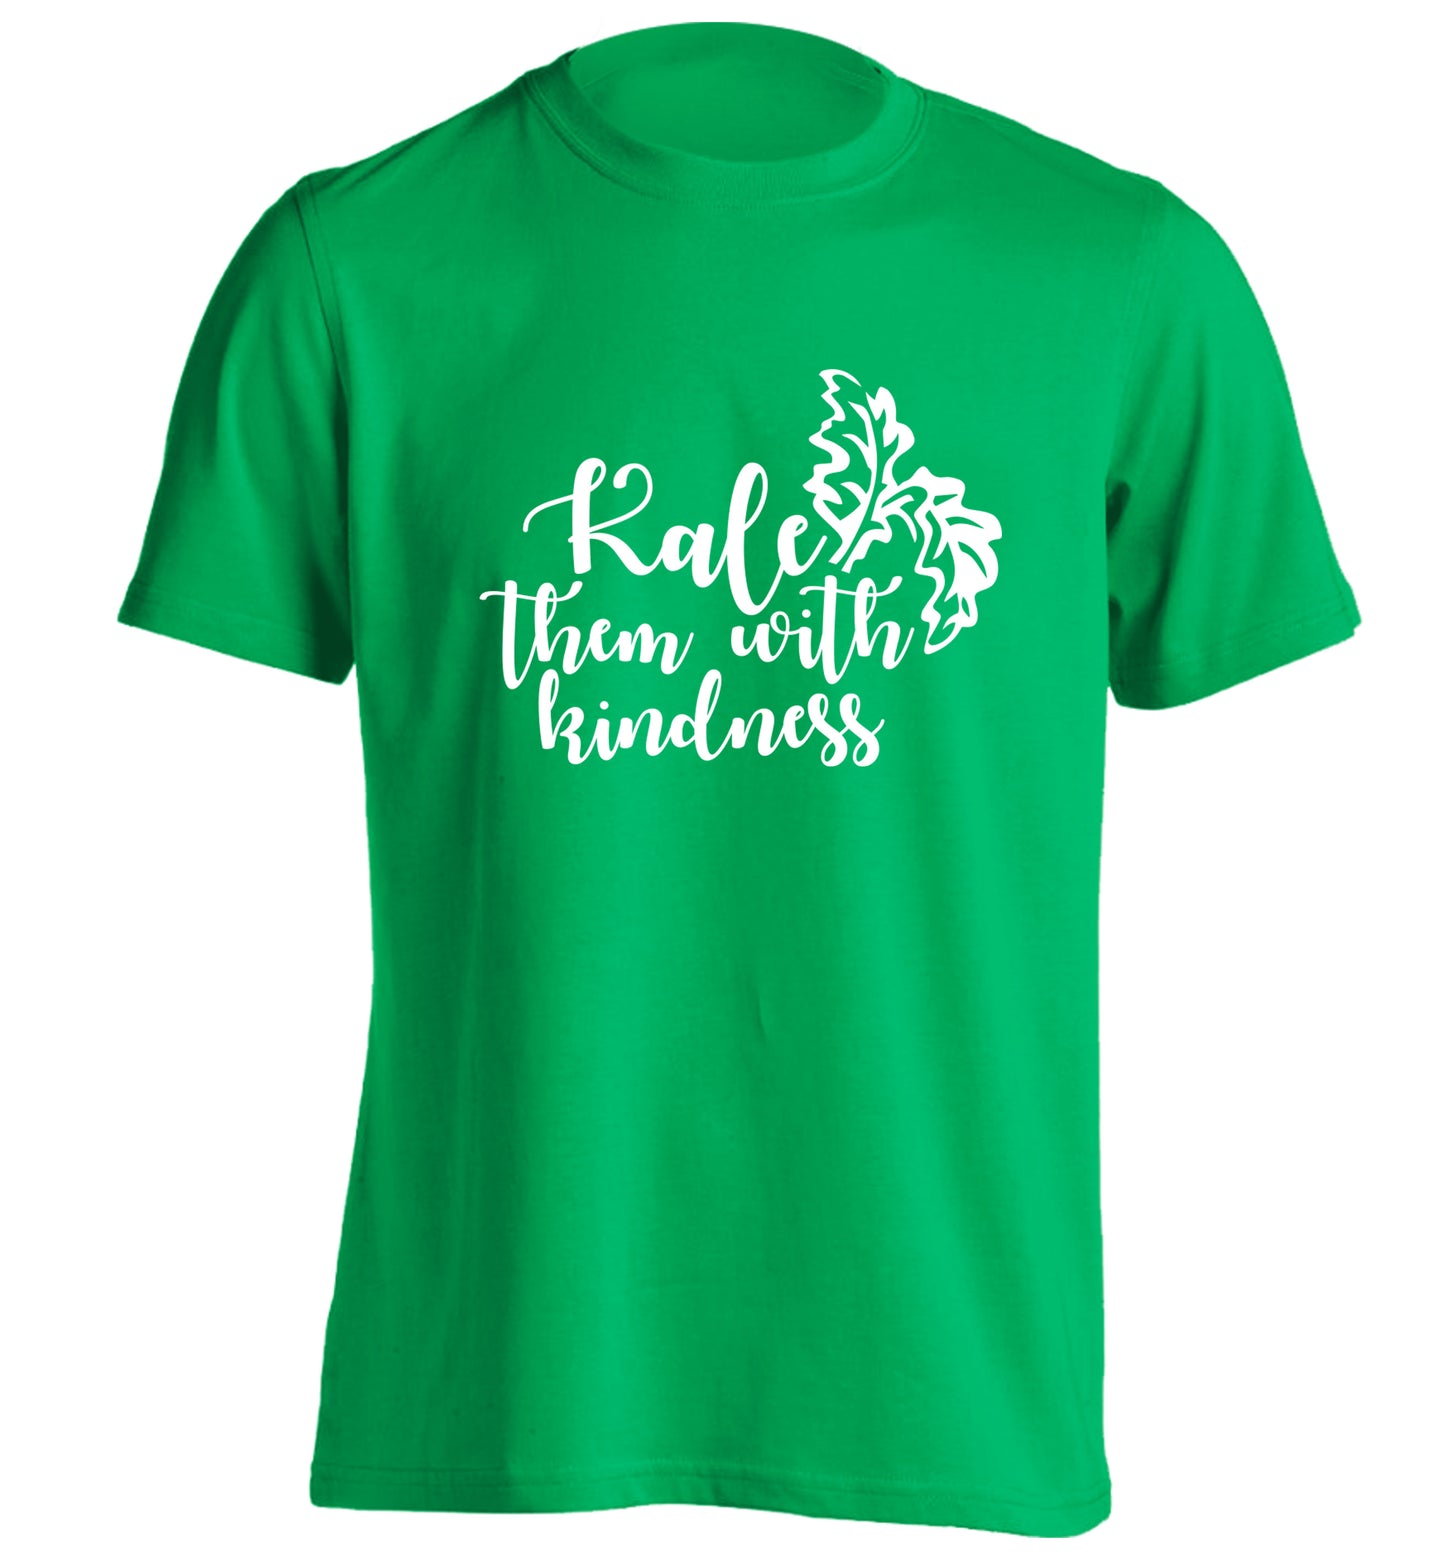 Kale them with kindness adults unisex green Tshirt 2XL